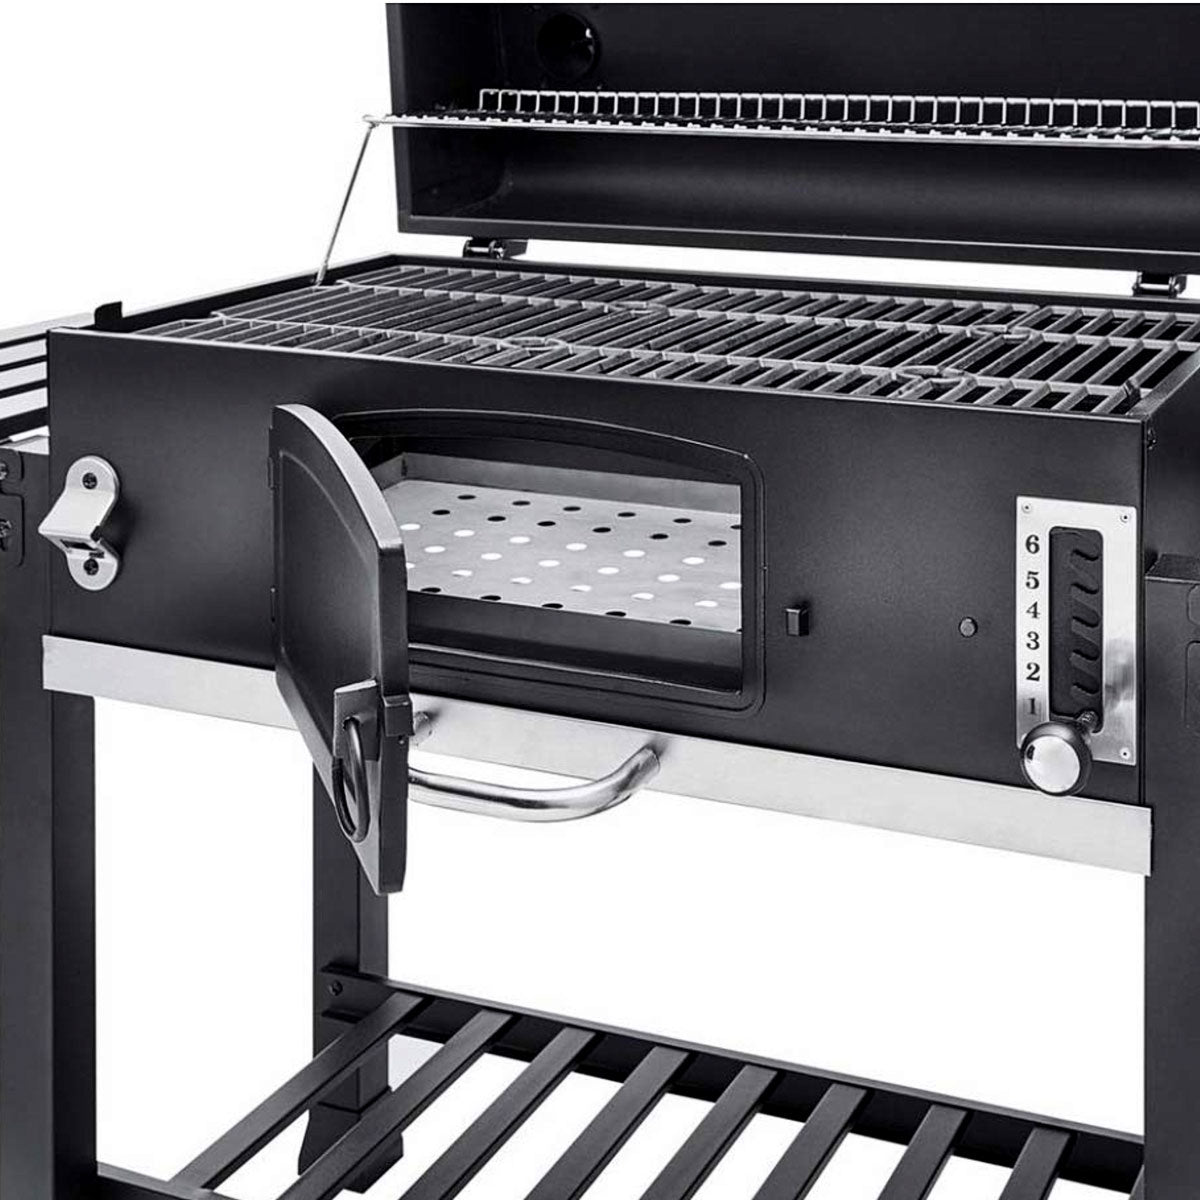 XXL Smoker Charcoal Barbecue + Cover - CosmoGrill